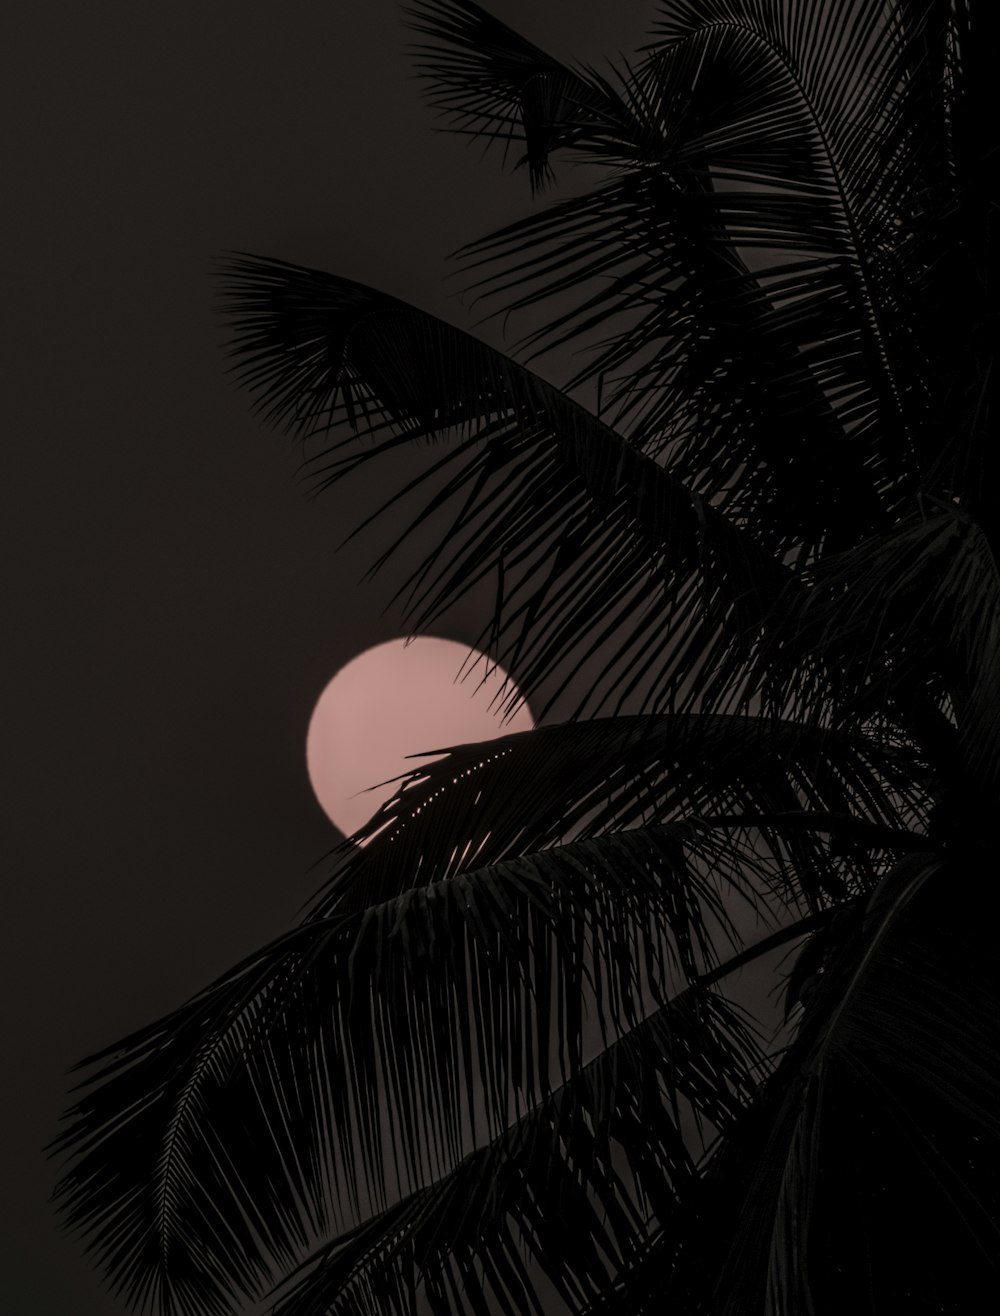 coconut tree under red moon